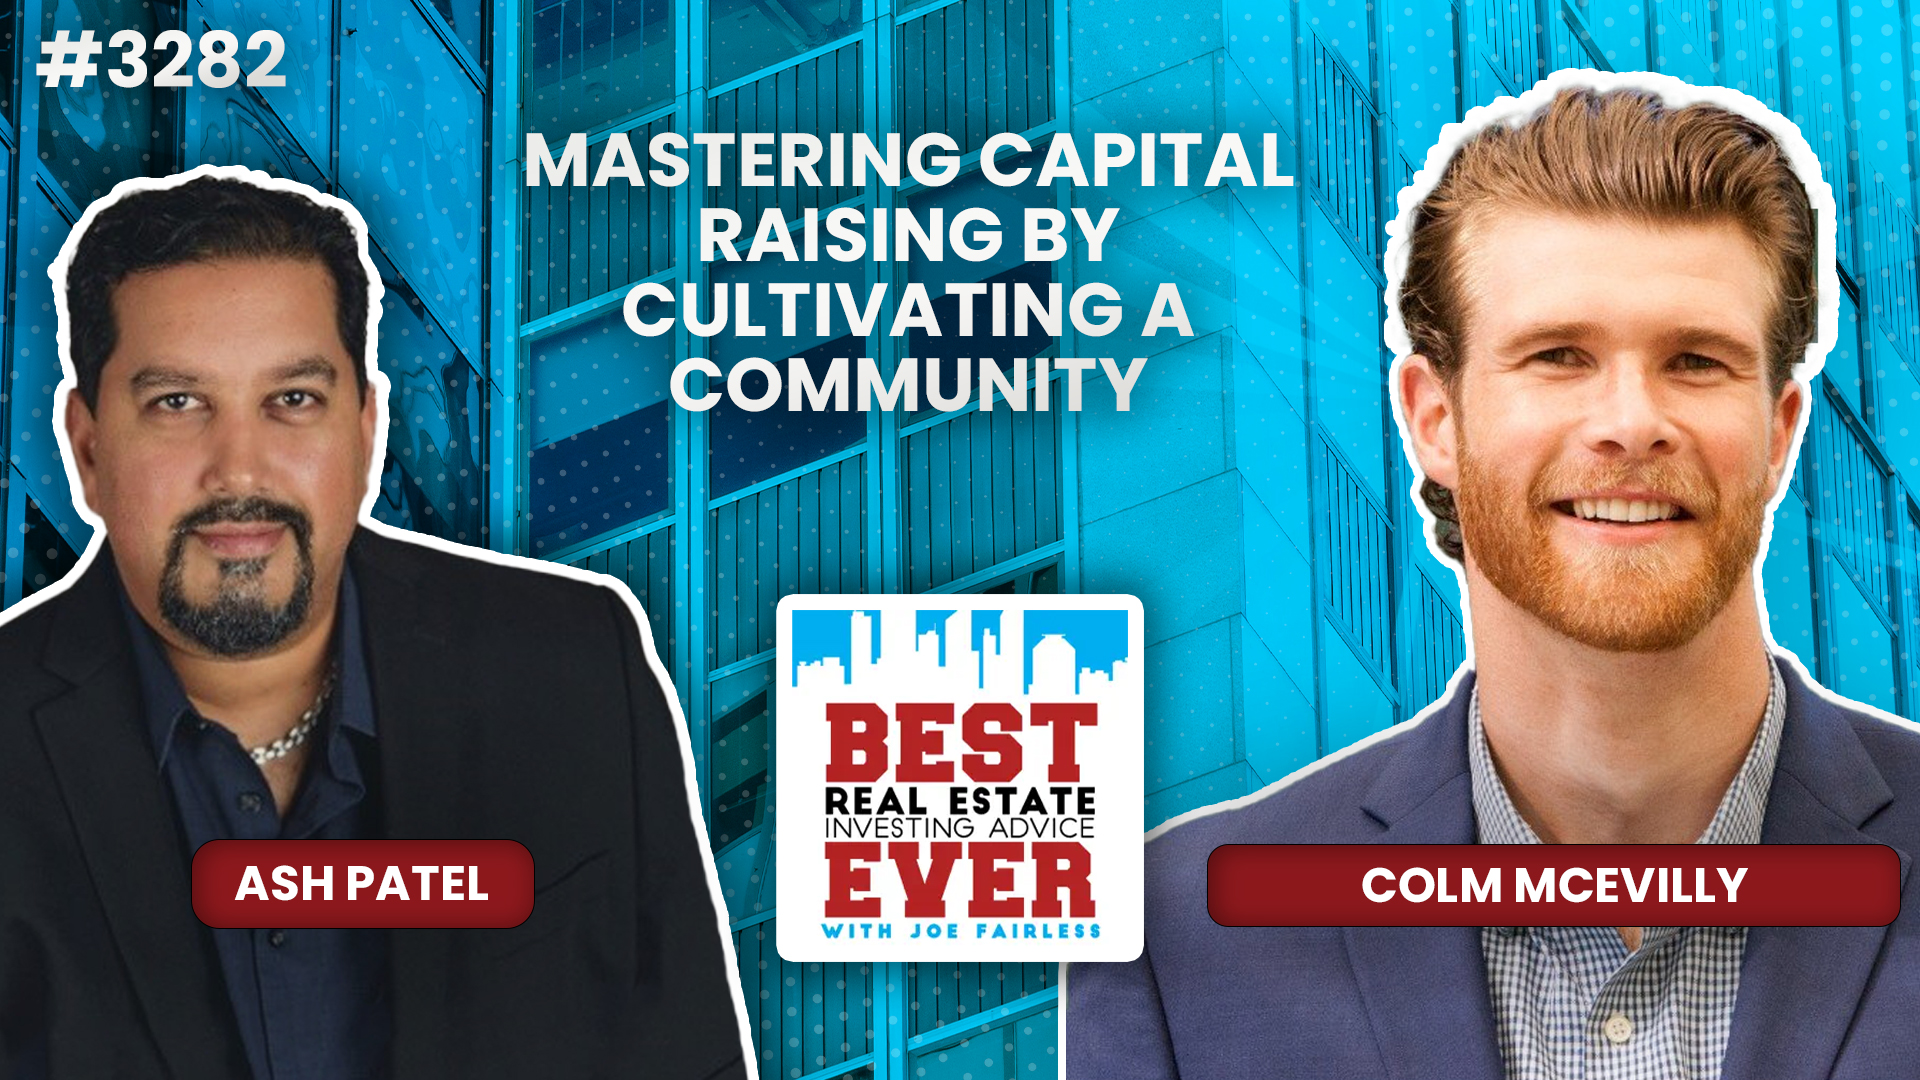 JF3282: Colm McEvilly — Mastering Capital Raising by Cultivating a Community